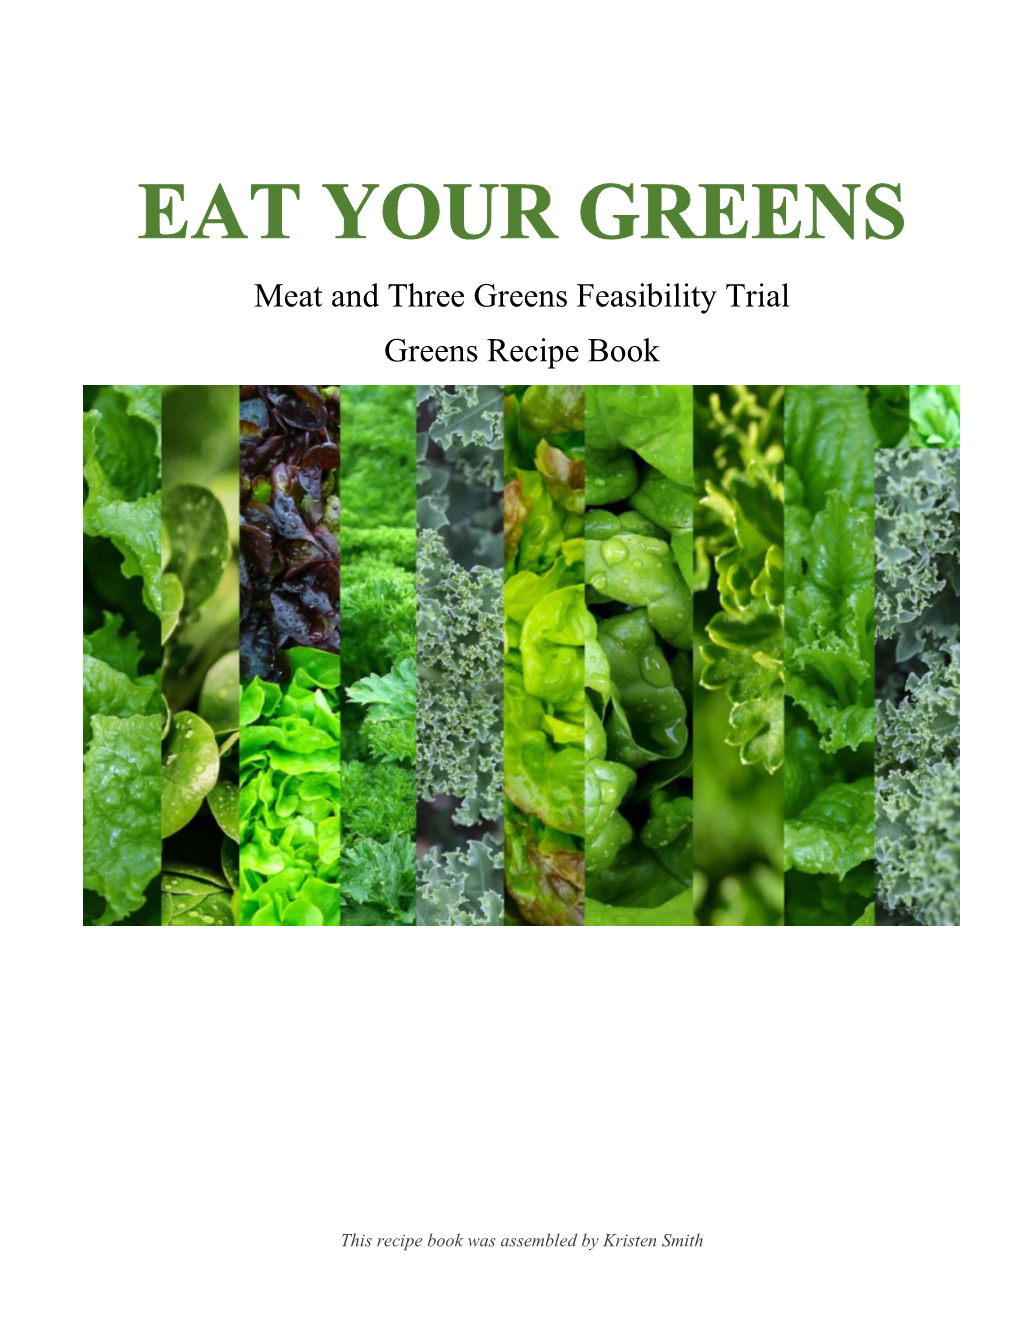 Meat and Three Greens Feasibility Trial Greens Recipe Book